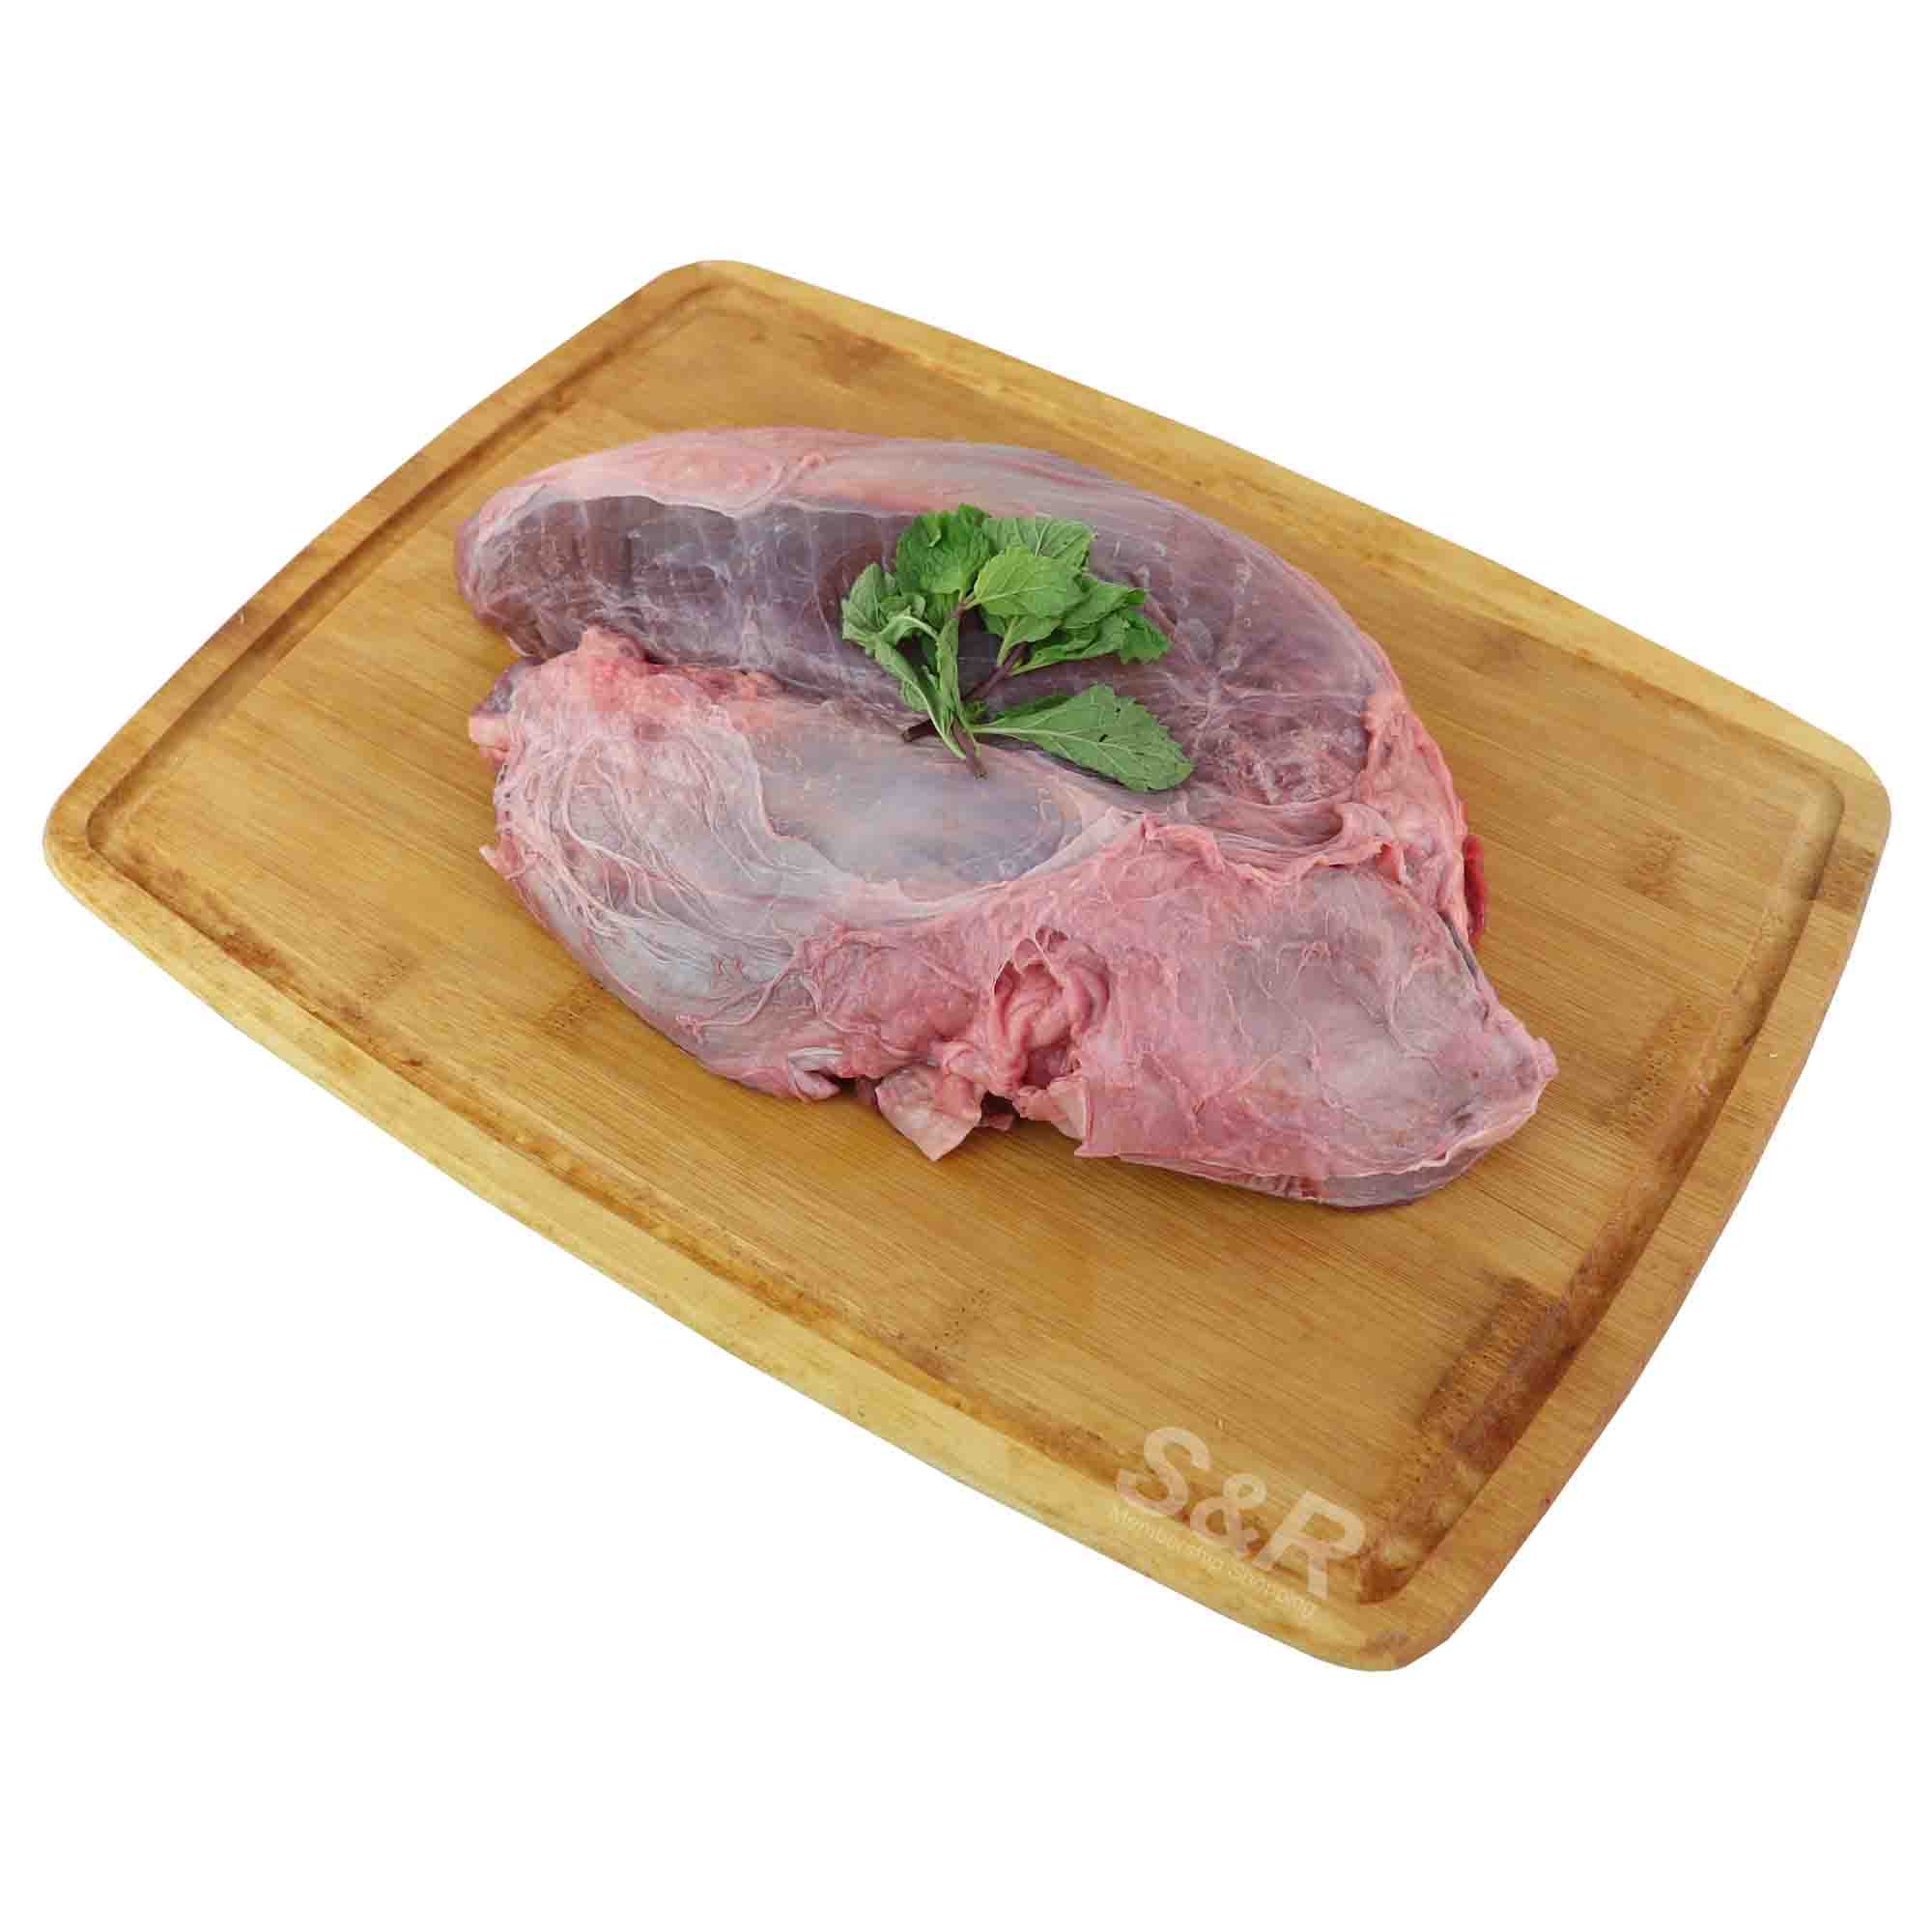 Members' Value Beef Kenchi approx. 2kg